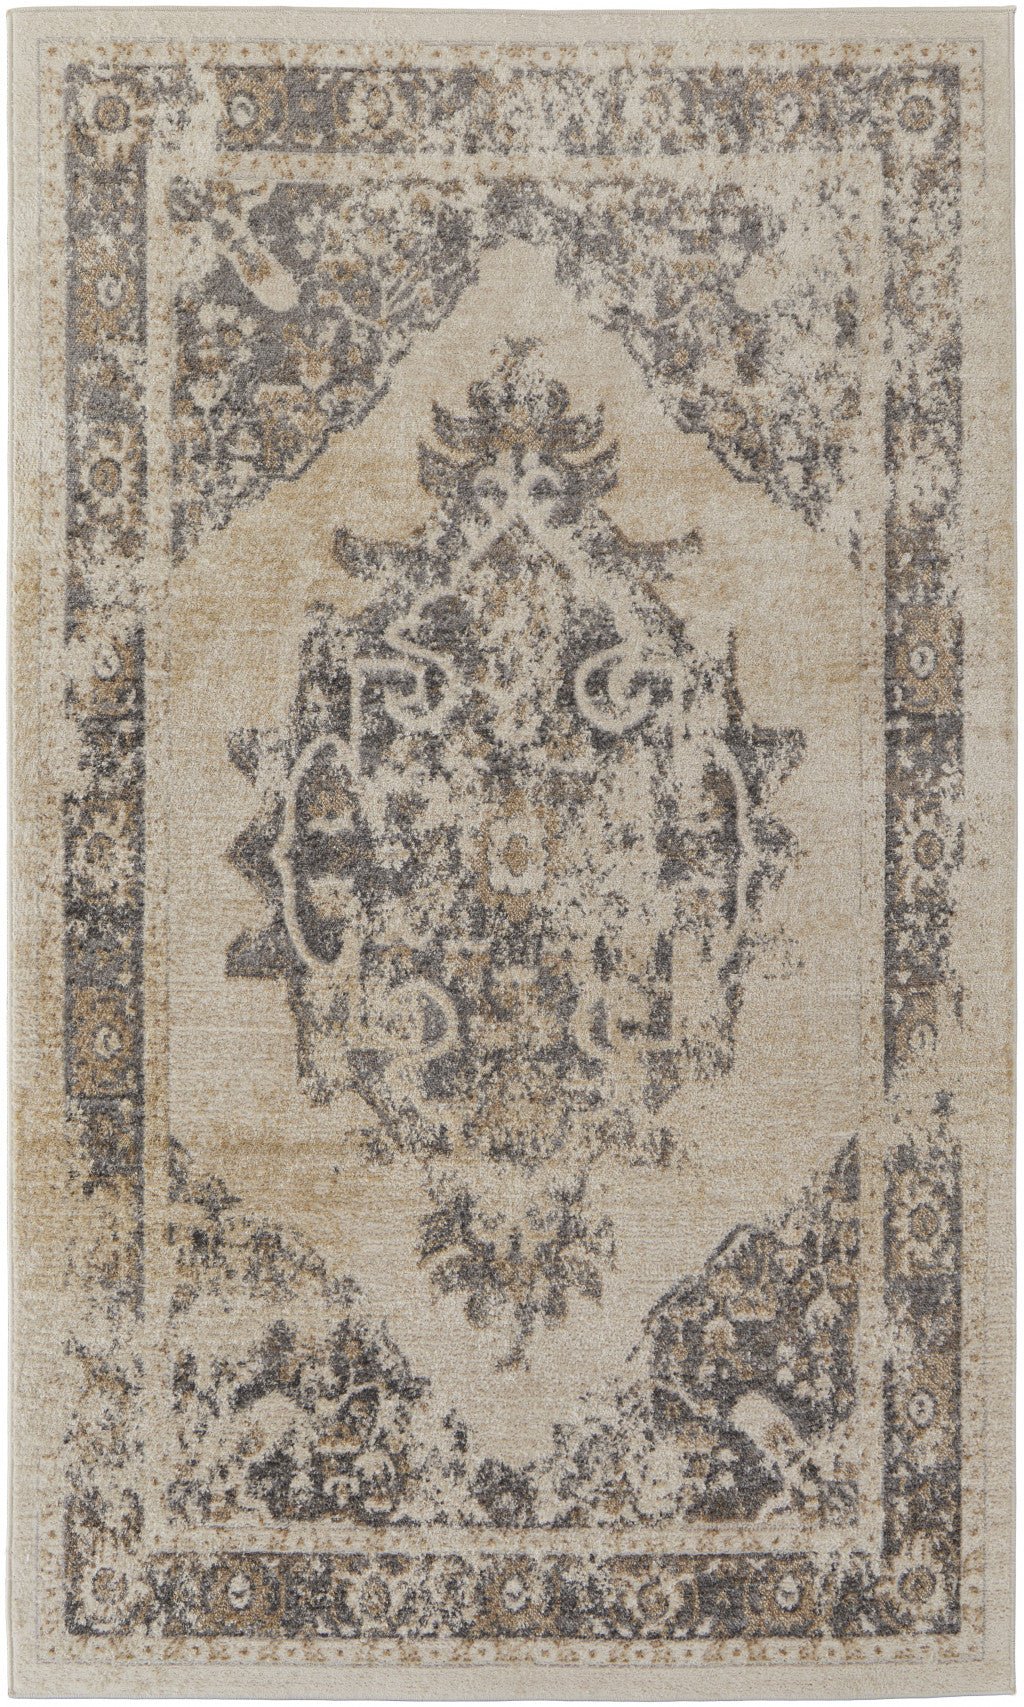 8' X 10' Ivory And Blue Floral Power Loom Distressed Area Rug